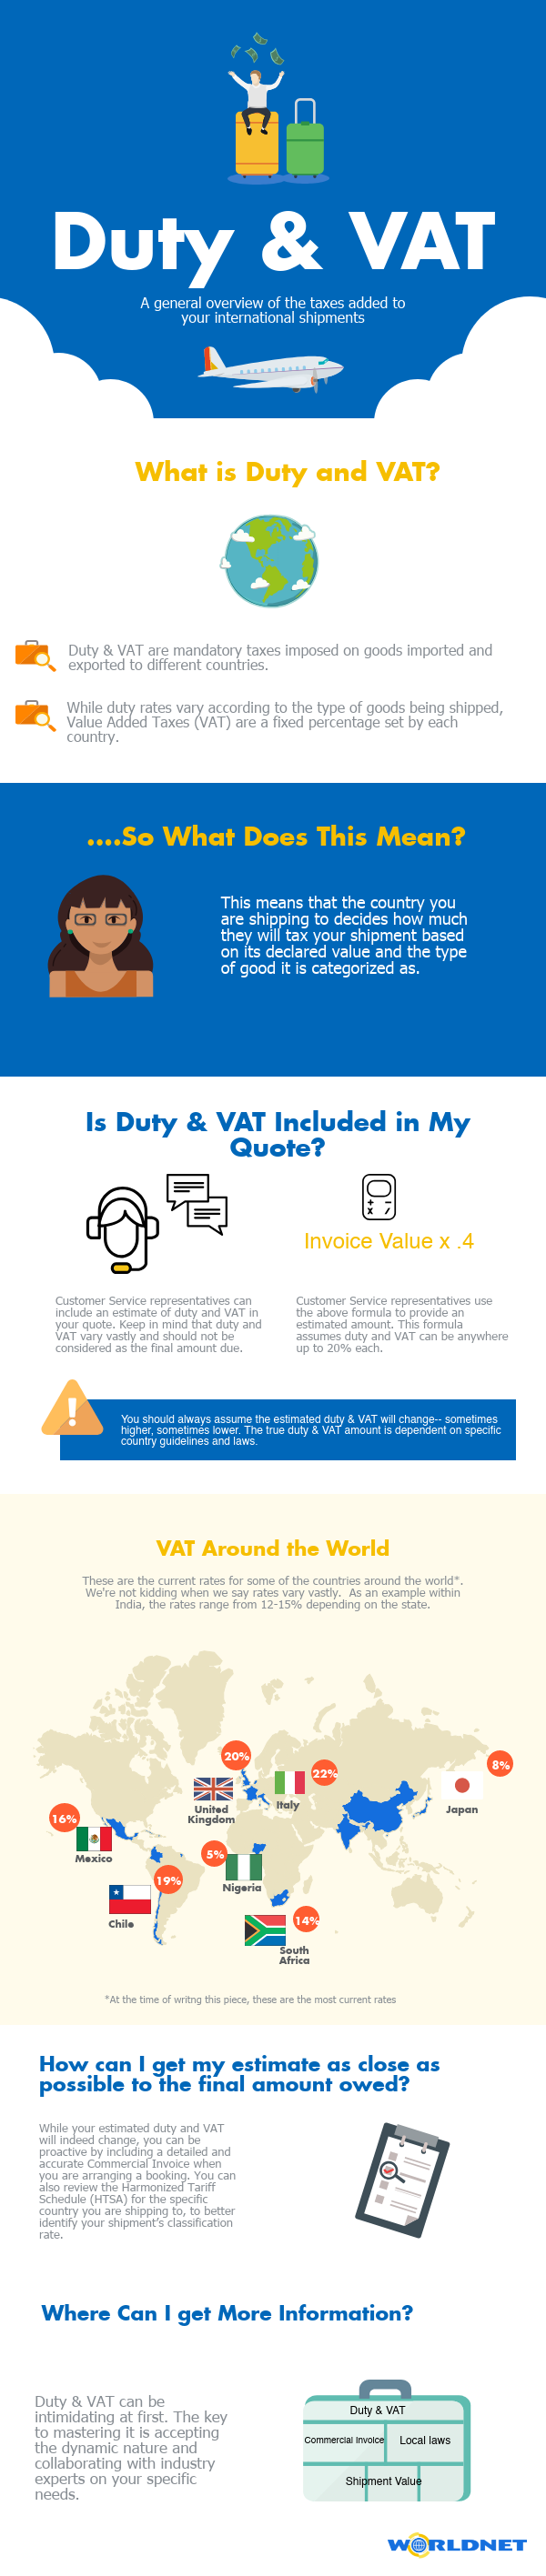 Duty and VAT 2018